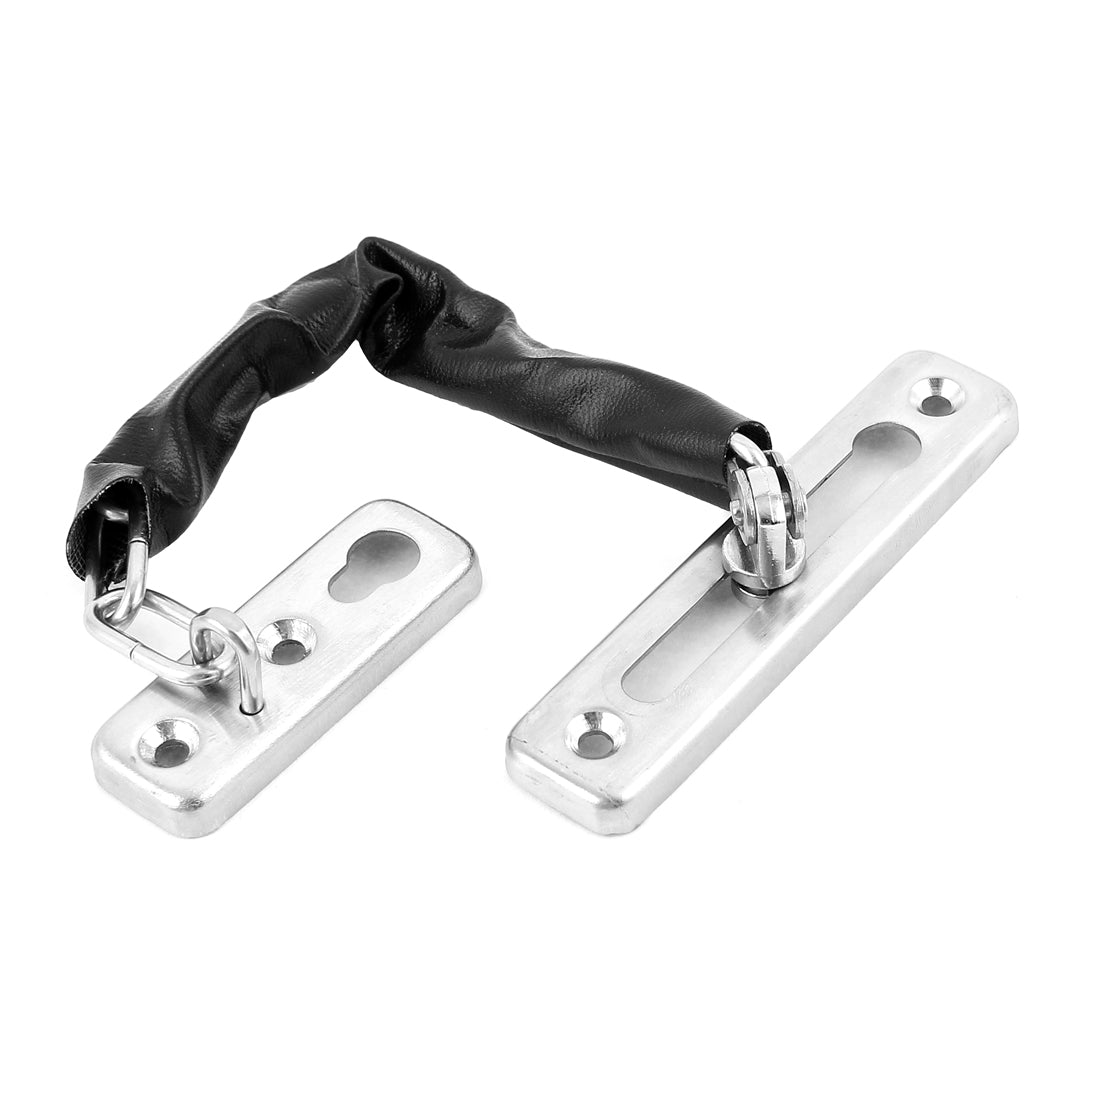 uxcell Uxcell Home Stainless Steel Security Slide Bolt Door Chain Lock Guard Hardware 21cm